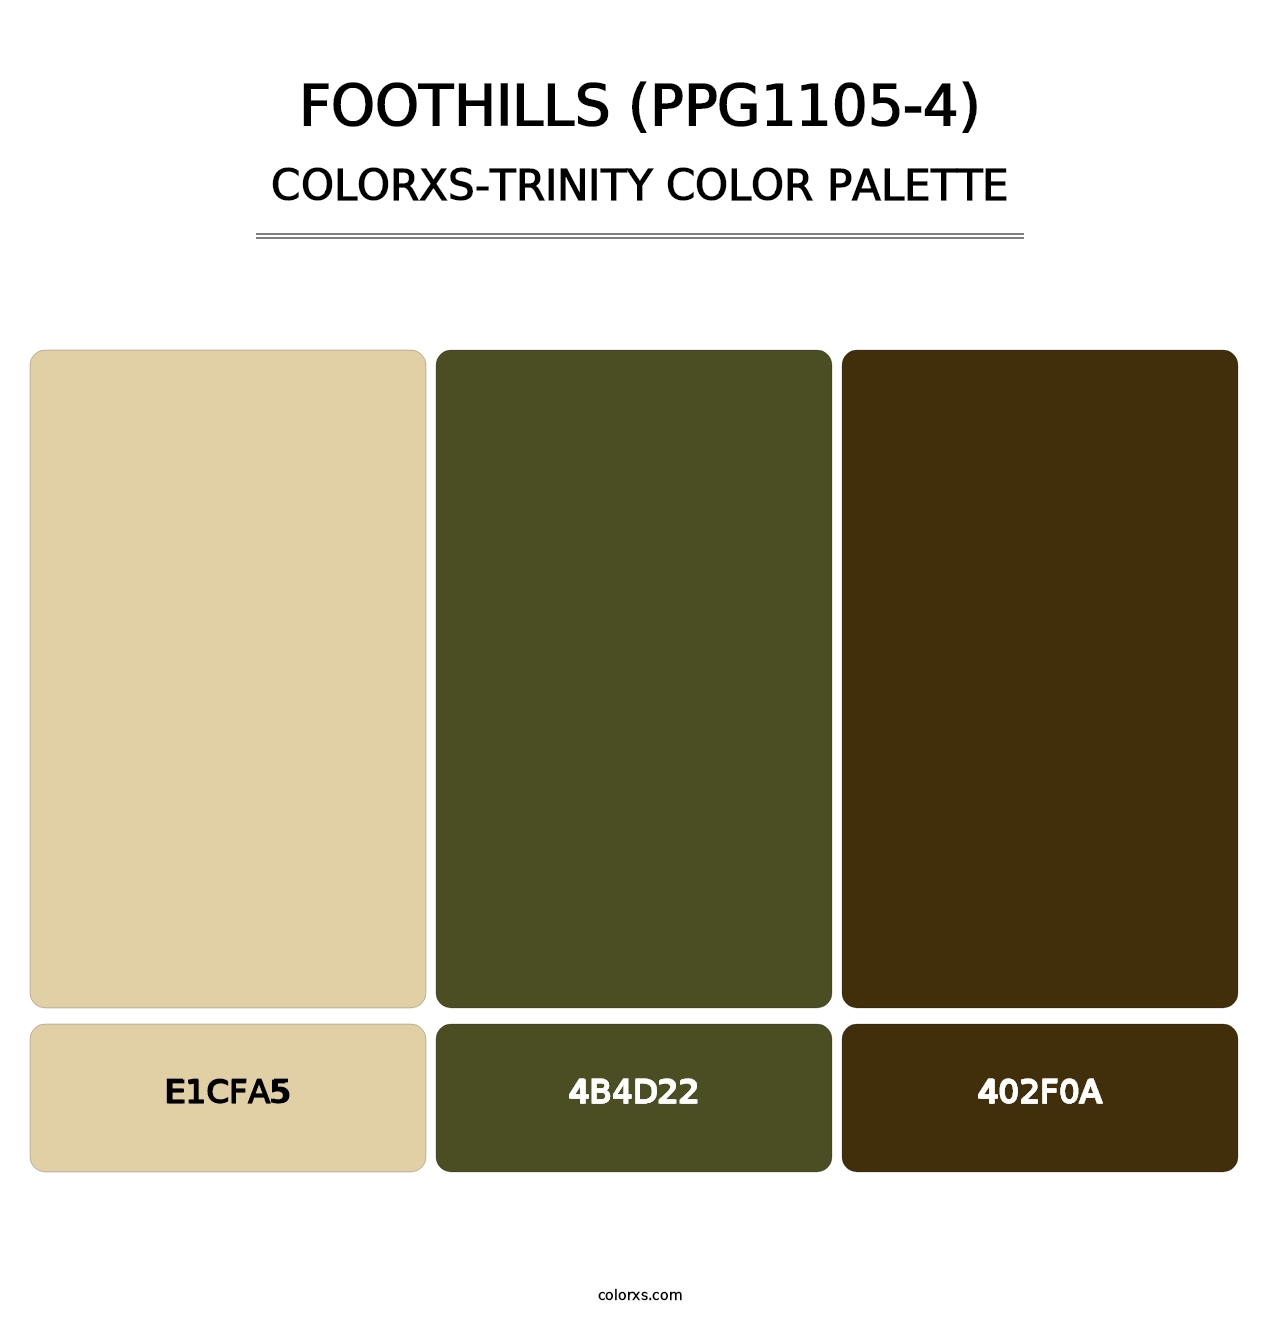 Foothills (PPG1105-4) - Colorxs Trinity Palette